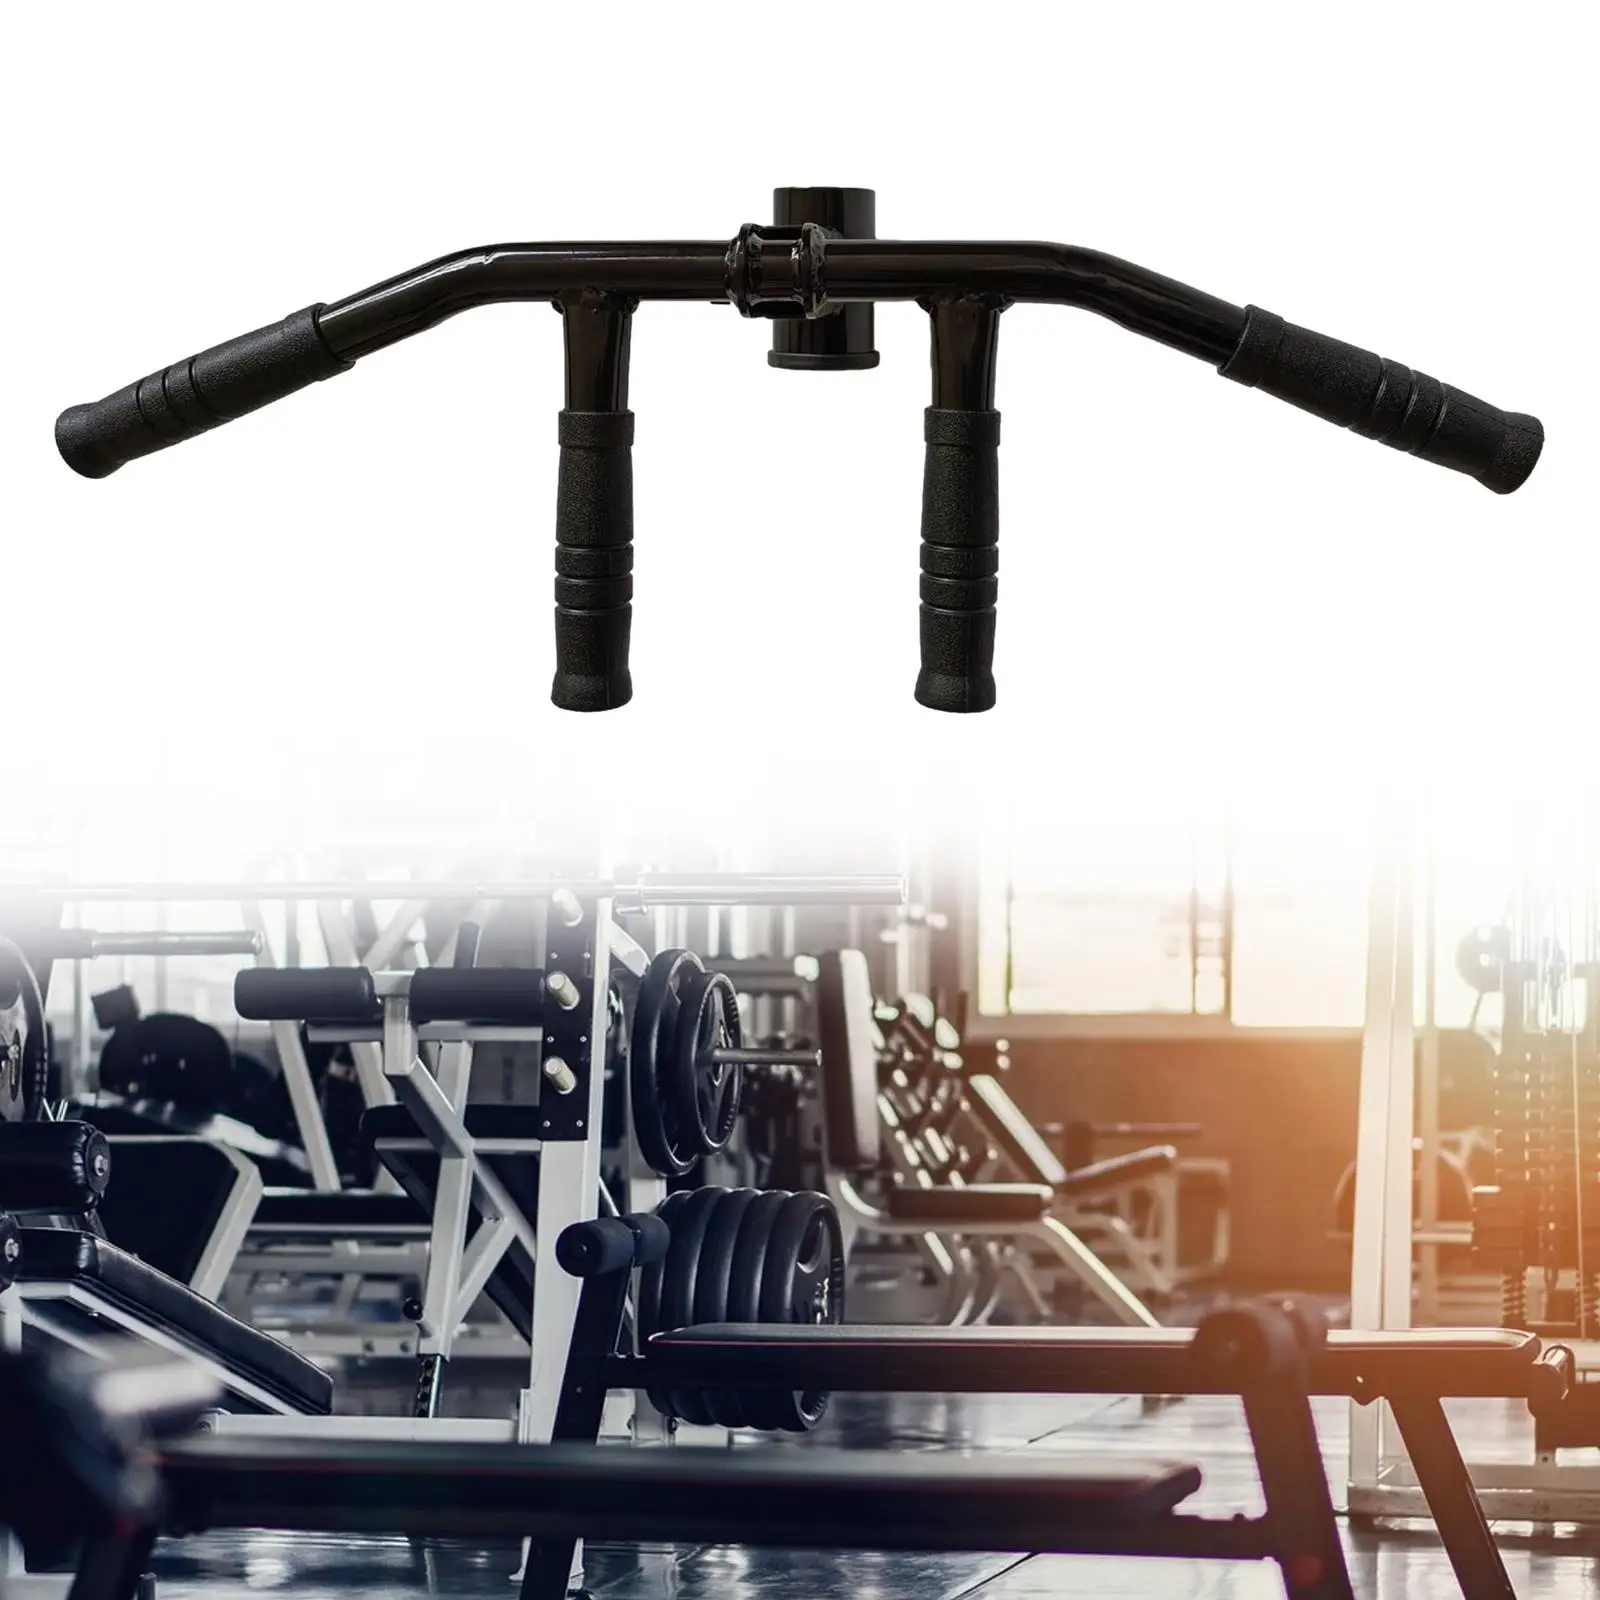 LAT Bar Easy to Install Durable T Bar Row Attachment Fitness Spreader Bar for Gym Workout Muscle Building Home Weight Lifting